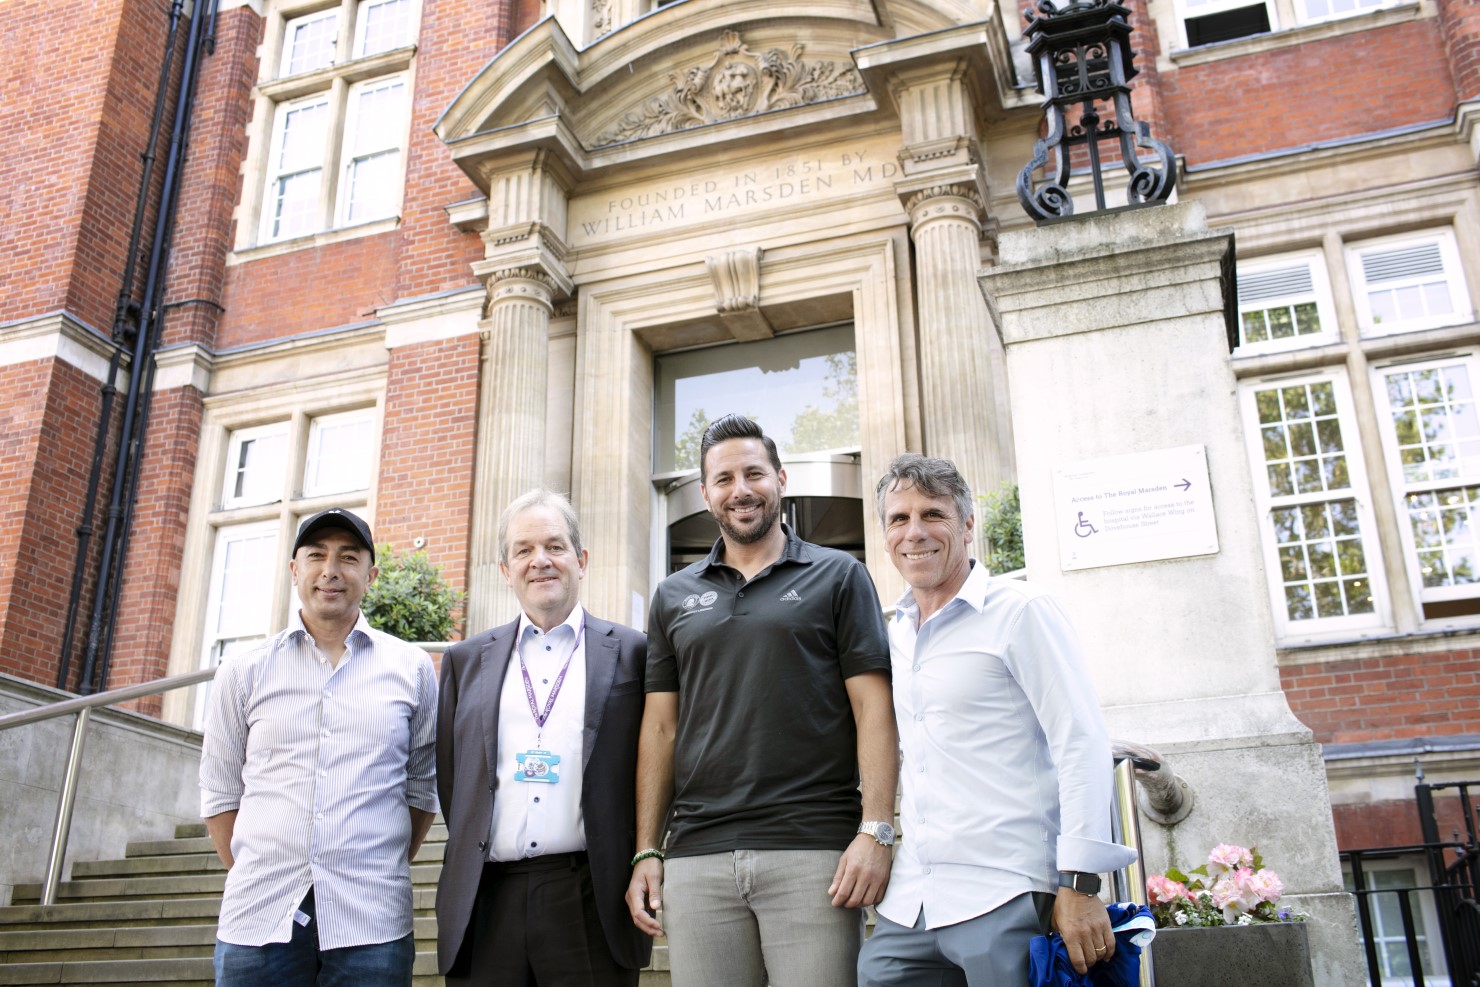 Legends outside the Royal Marsden with DC